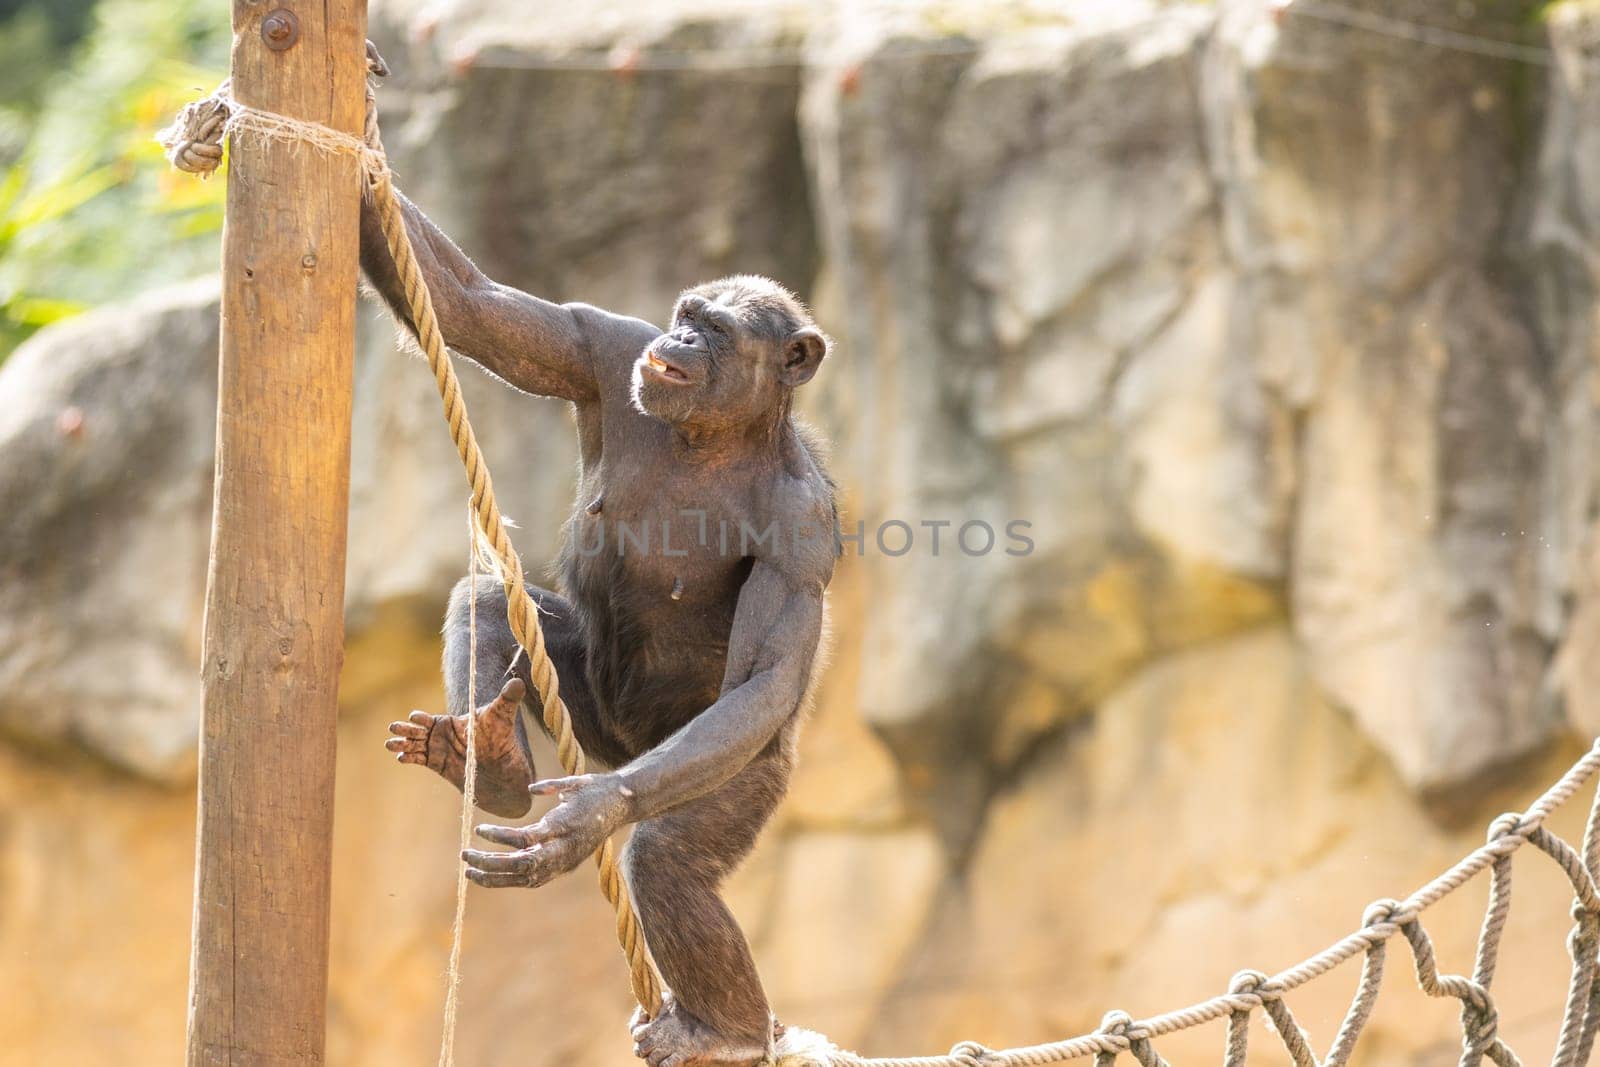 A monkey climbing a rope in a zoo